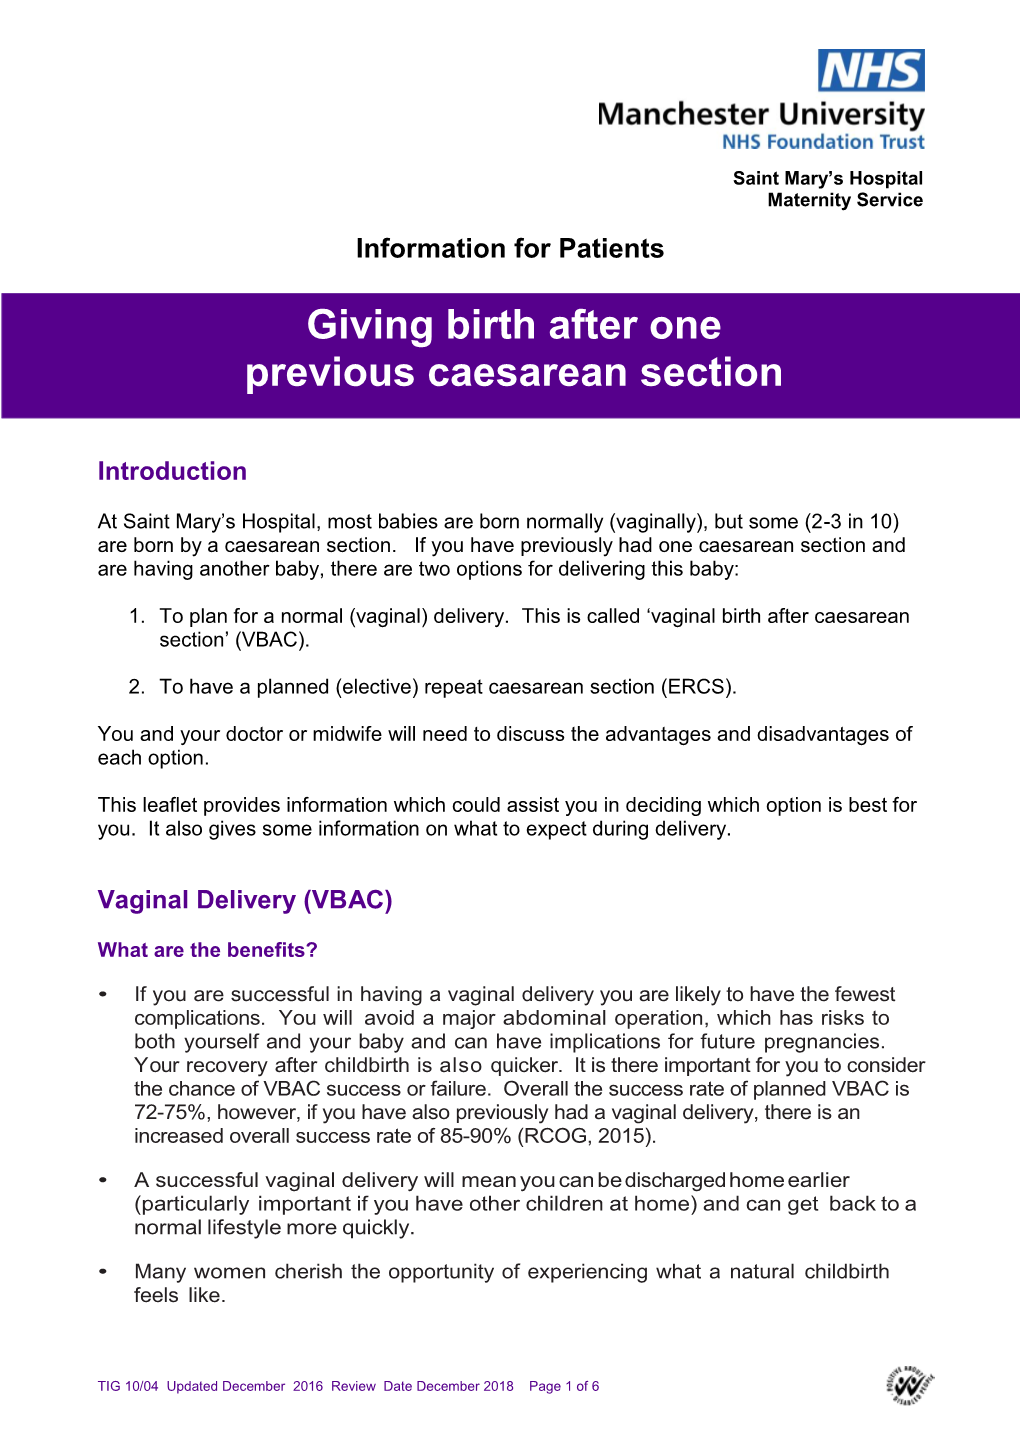 Giving Birth After One Previous Caesarean Section